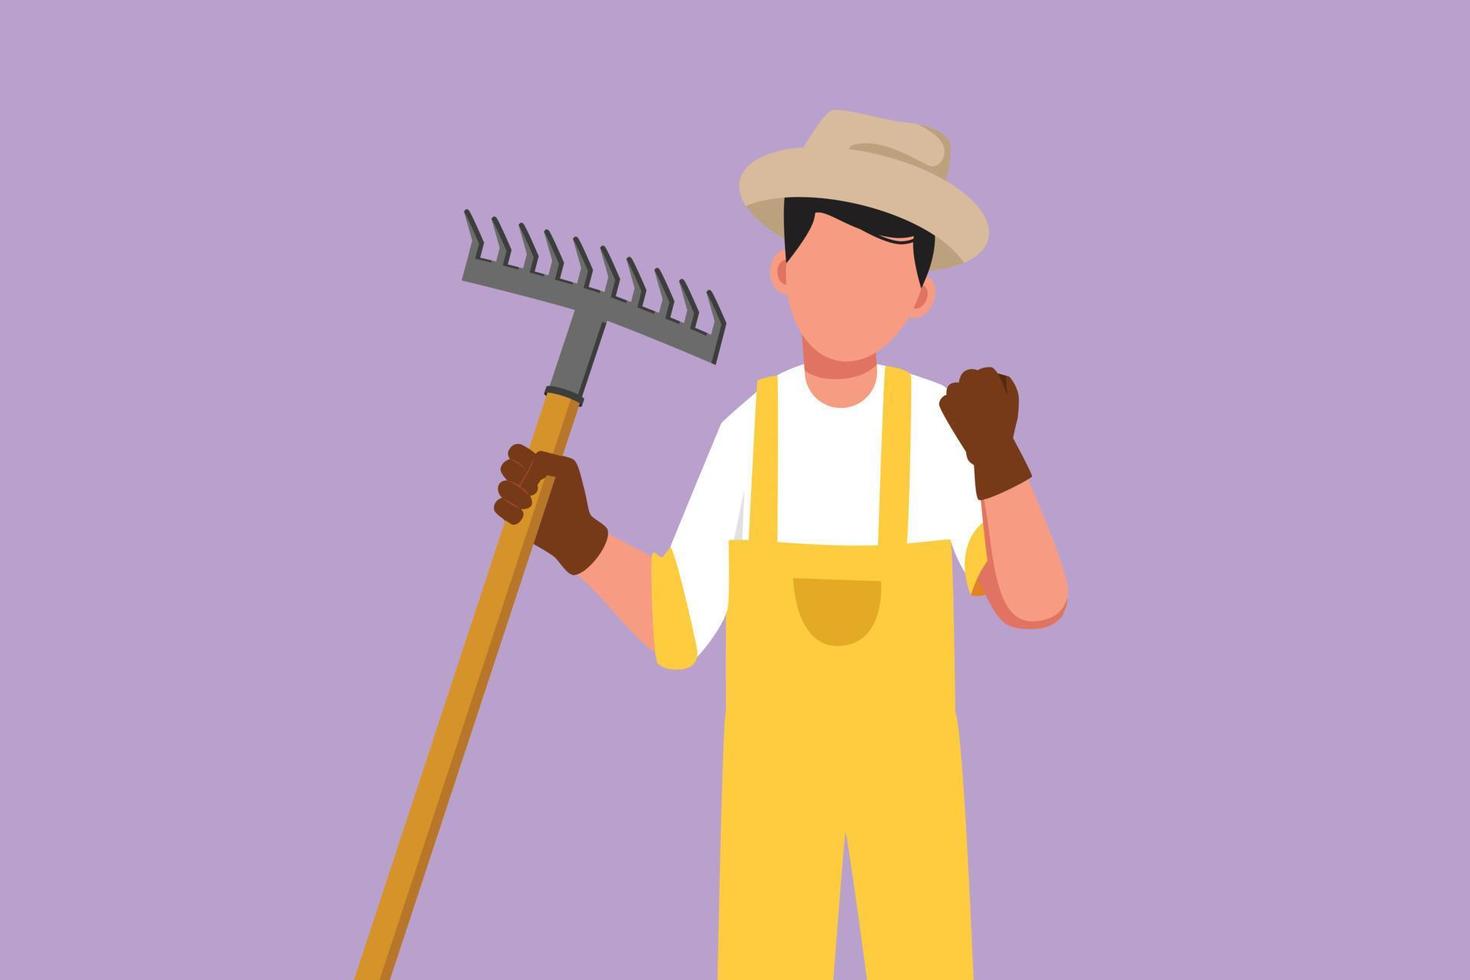 Graphic flat design drawing farmer holding rake with celebrate gesture and wearing straw hat to working on farm at harvest time. Countryside or rural living people. Cartoon style vector illustration